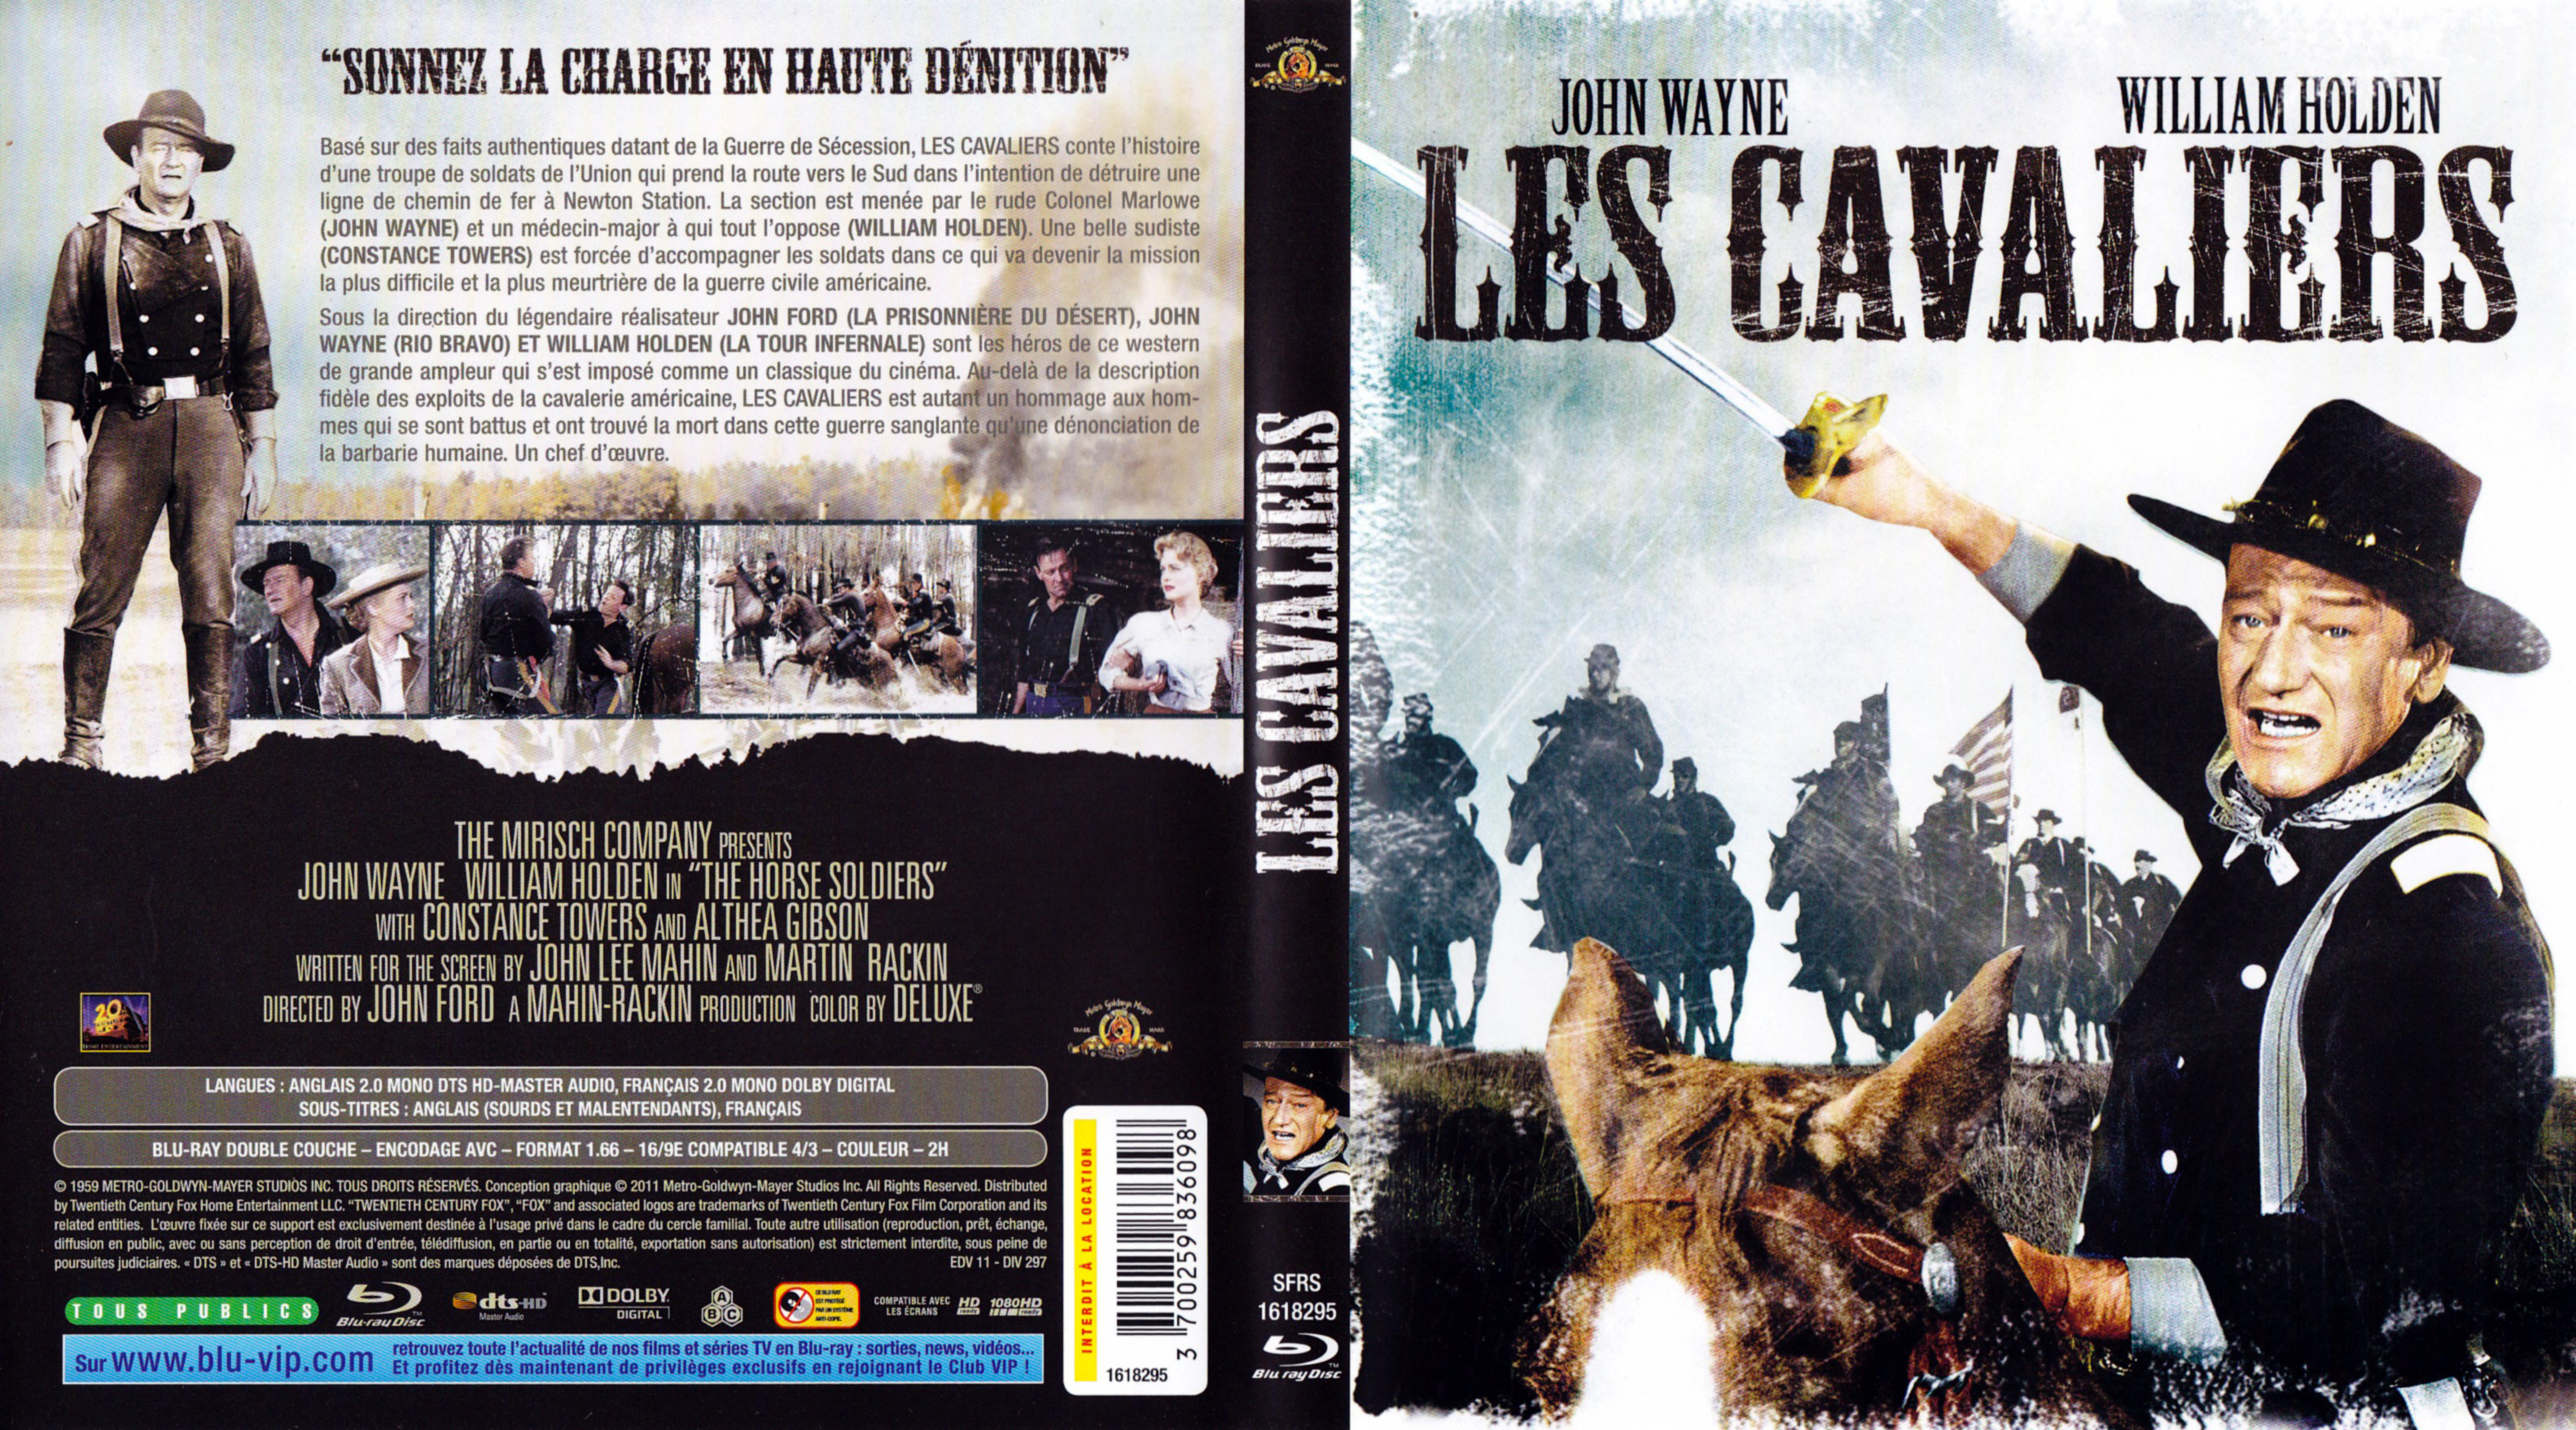 Jaquette DVD Les cavaliers (BLU-RAY)